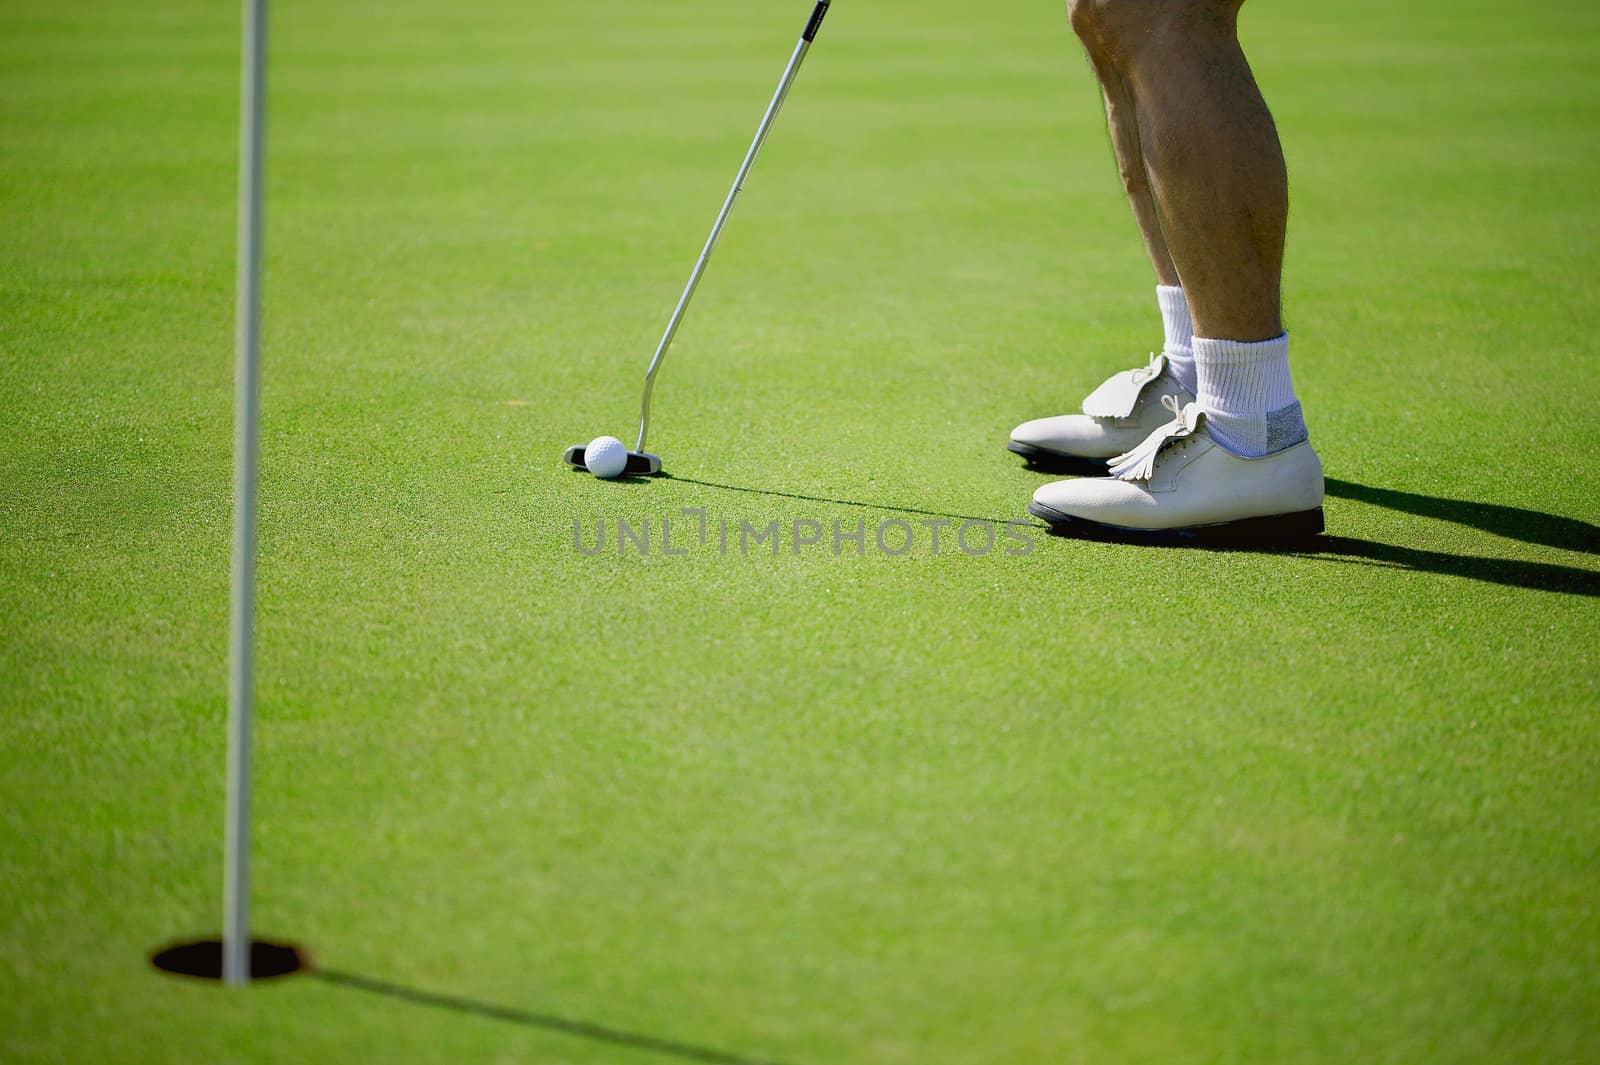 on the putting green